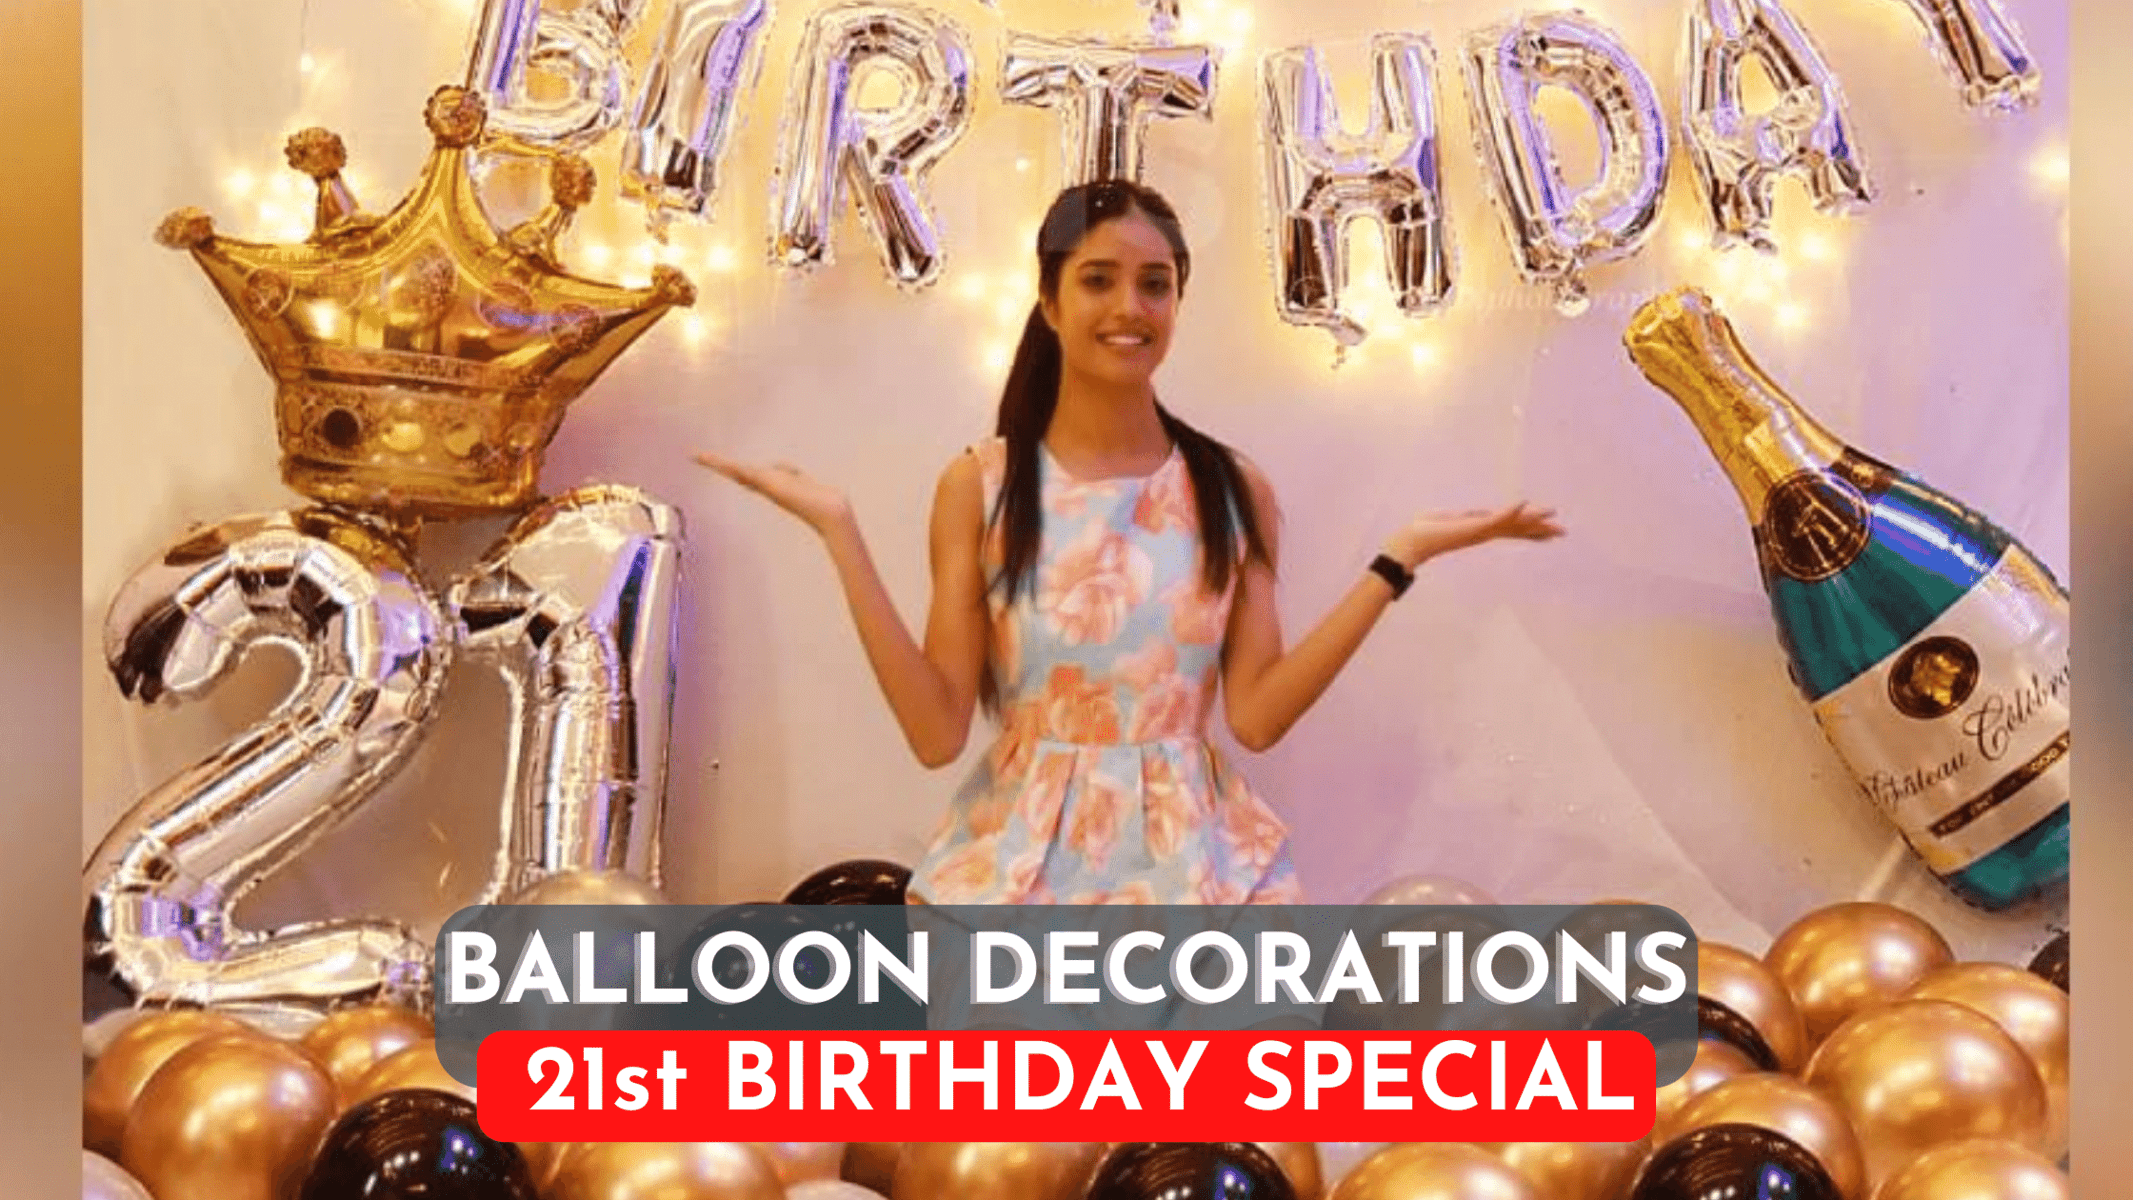 Make your 21st Birthday Memorable with Balloon Decorations